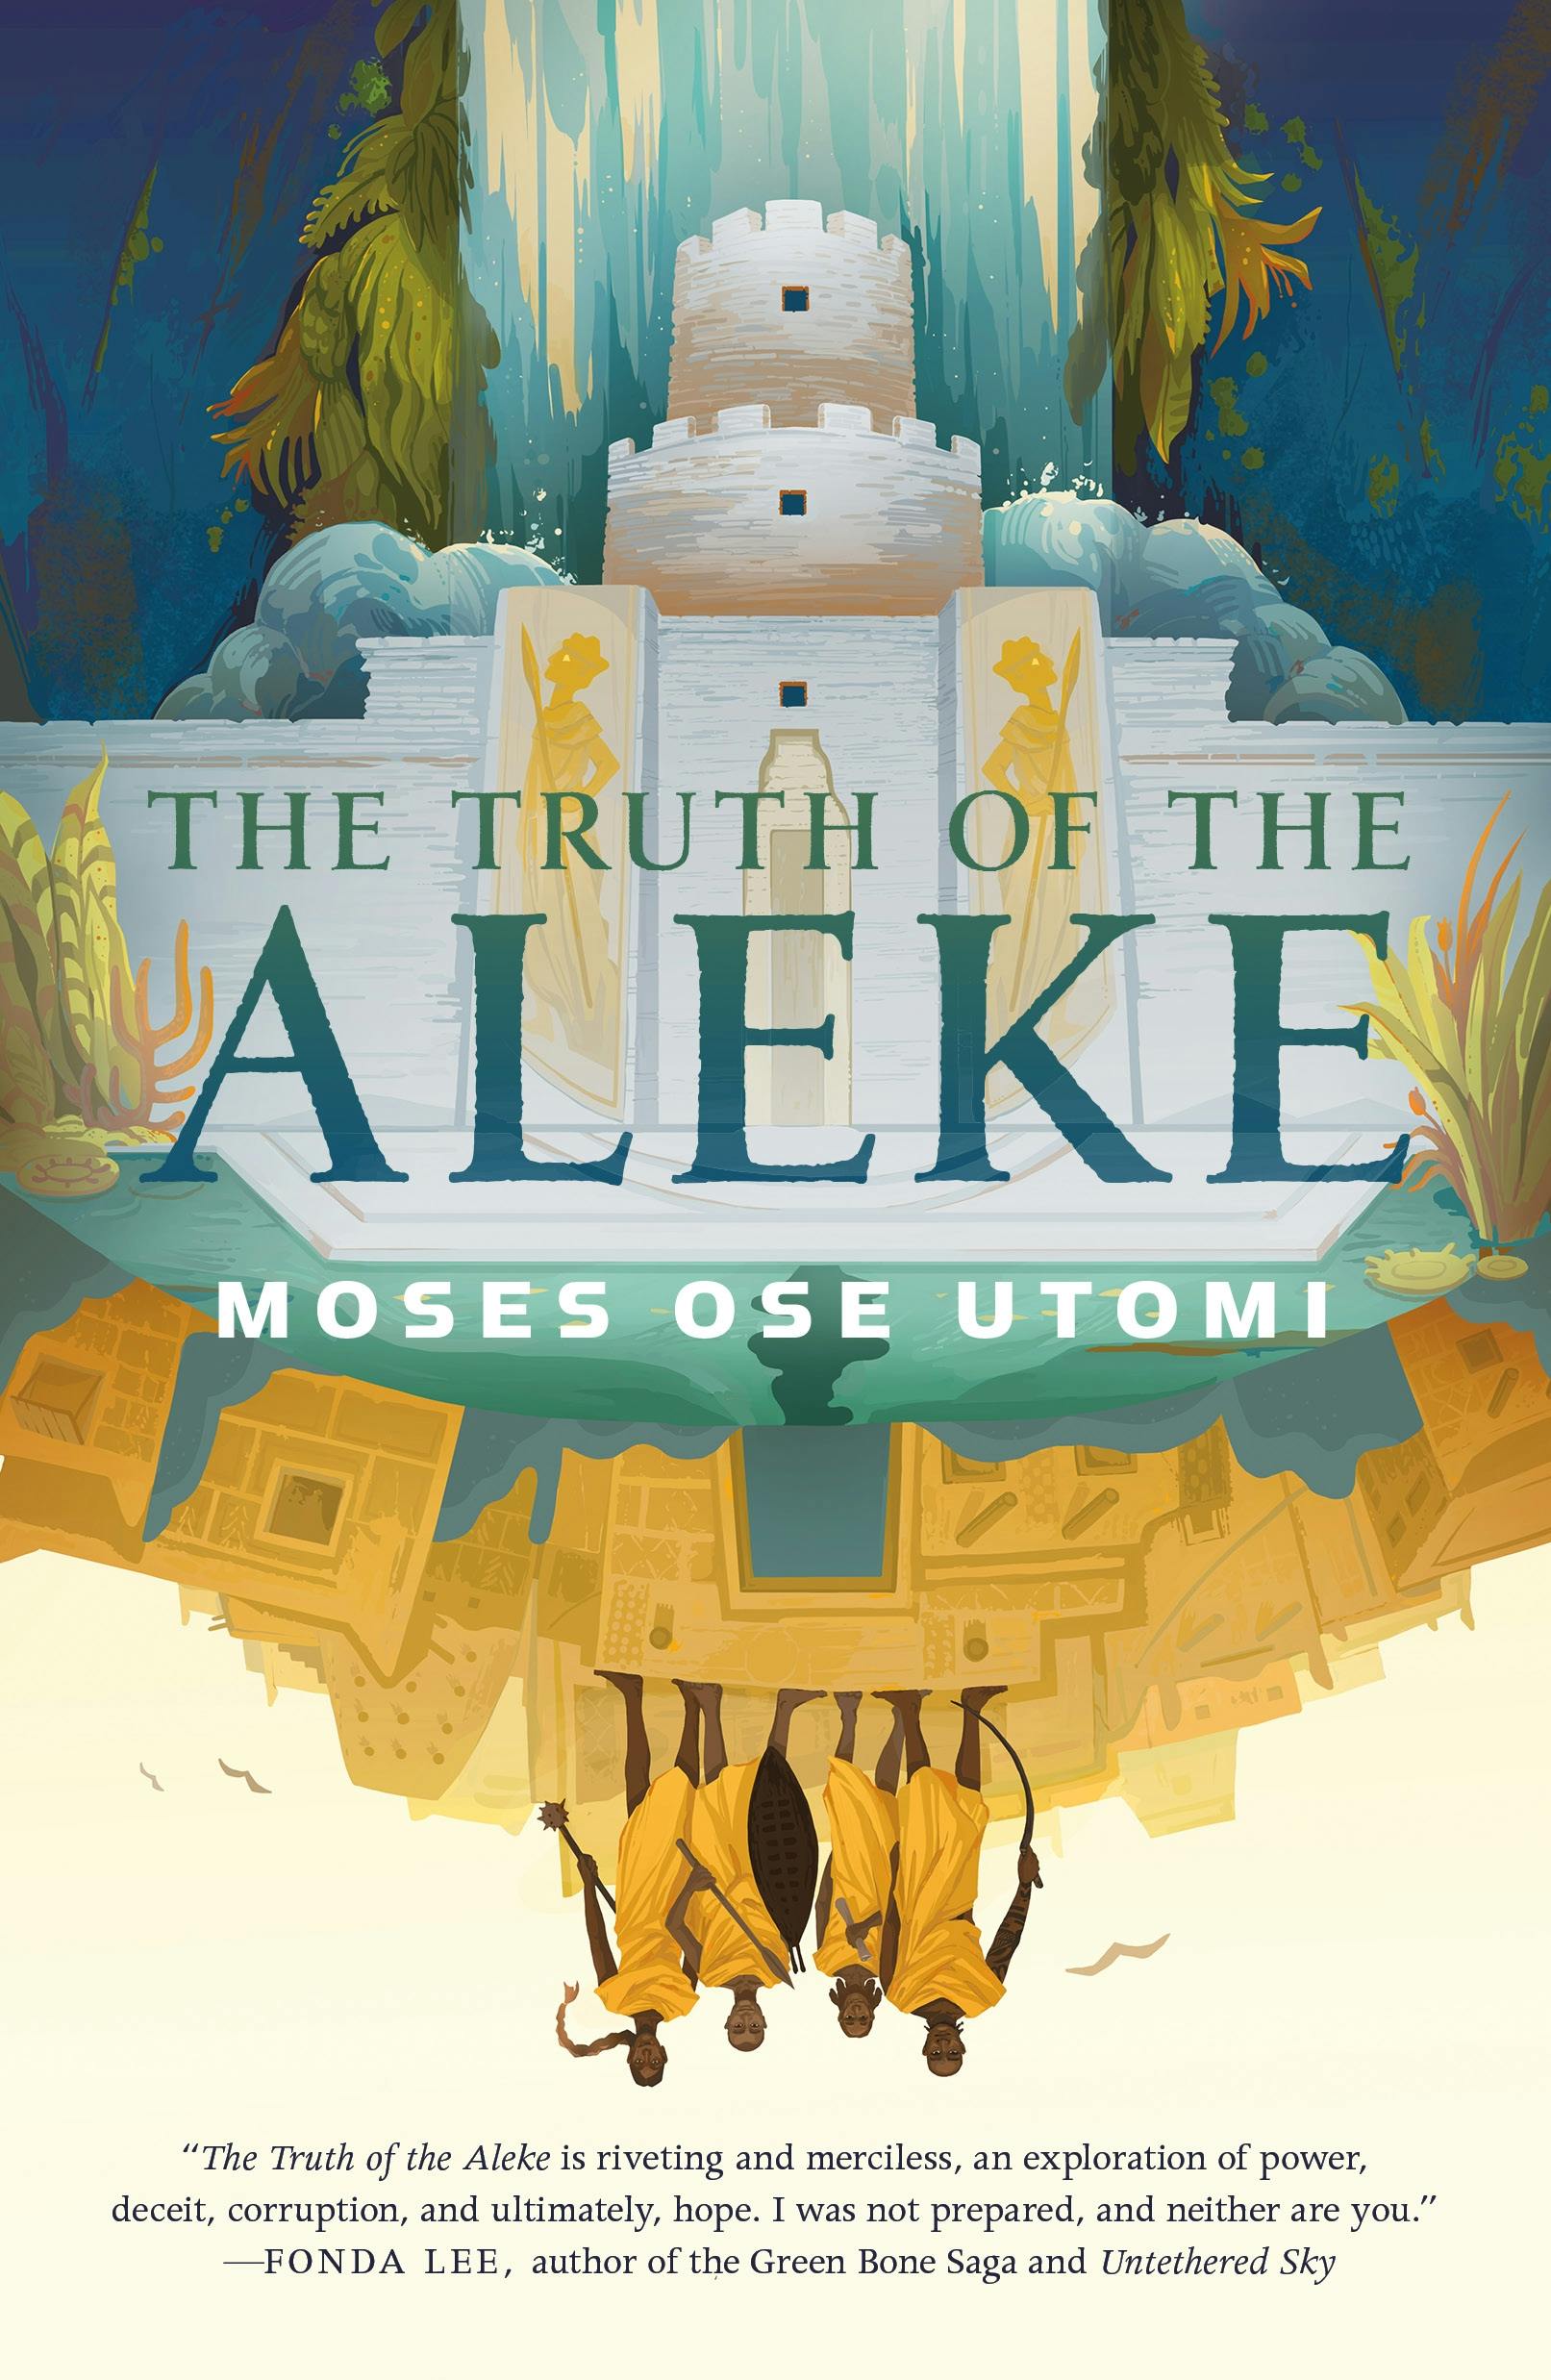 Cover for the book titled as: The Truth of the Aleke